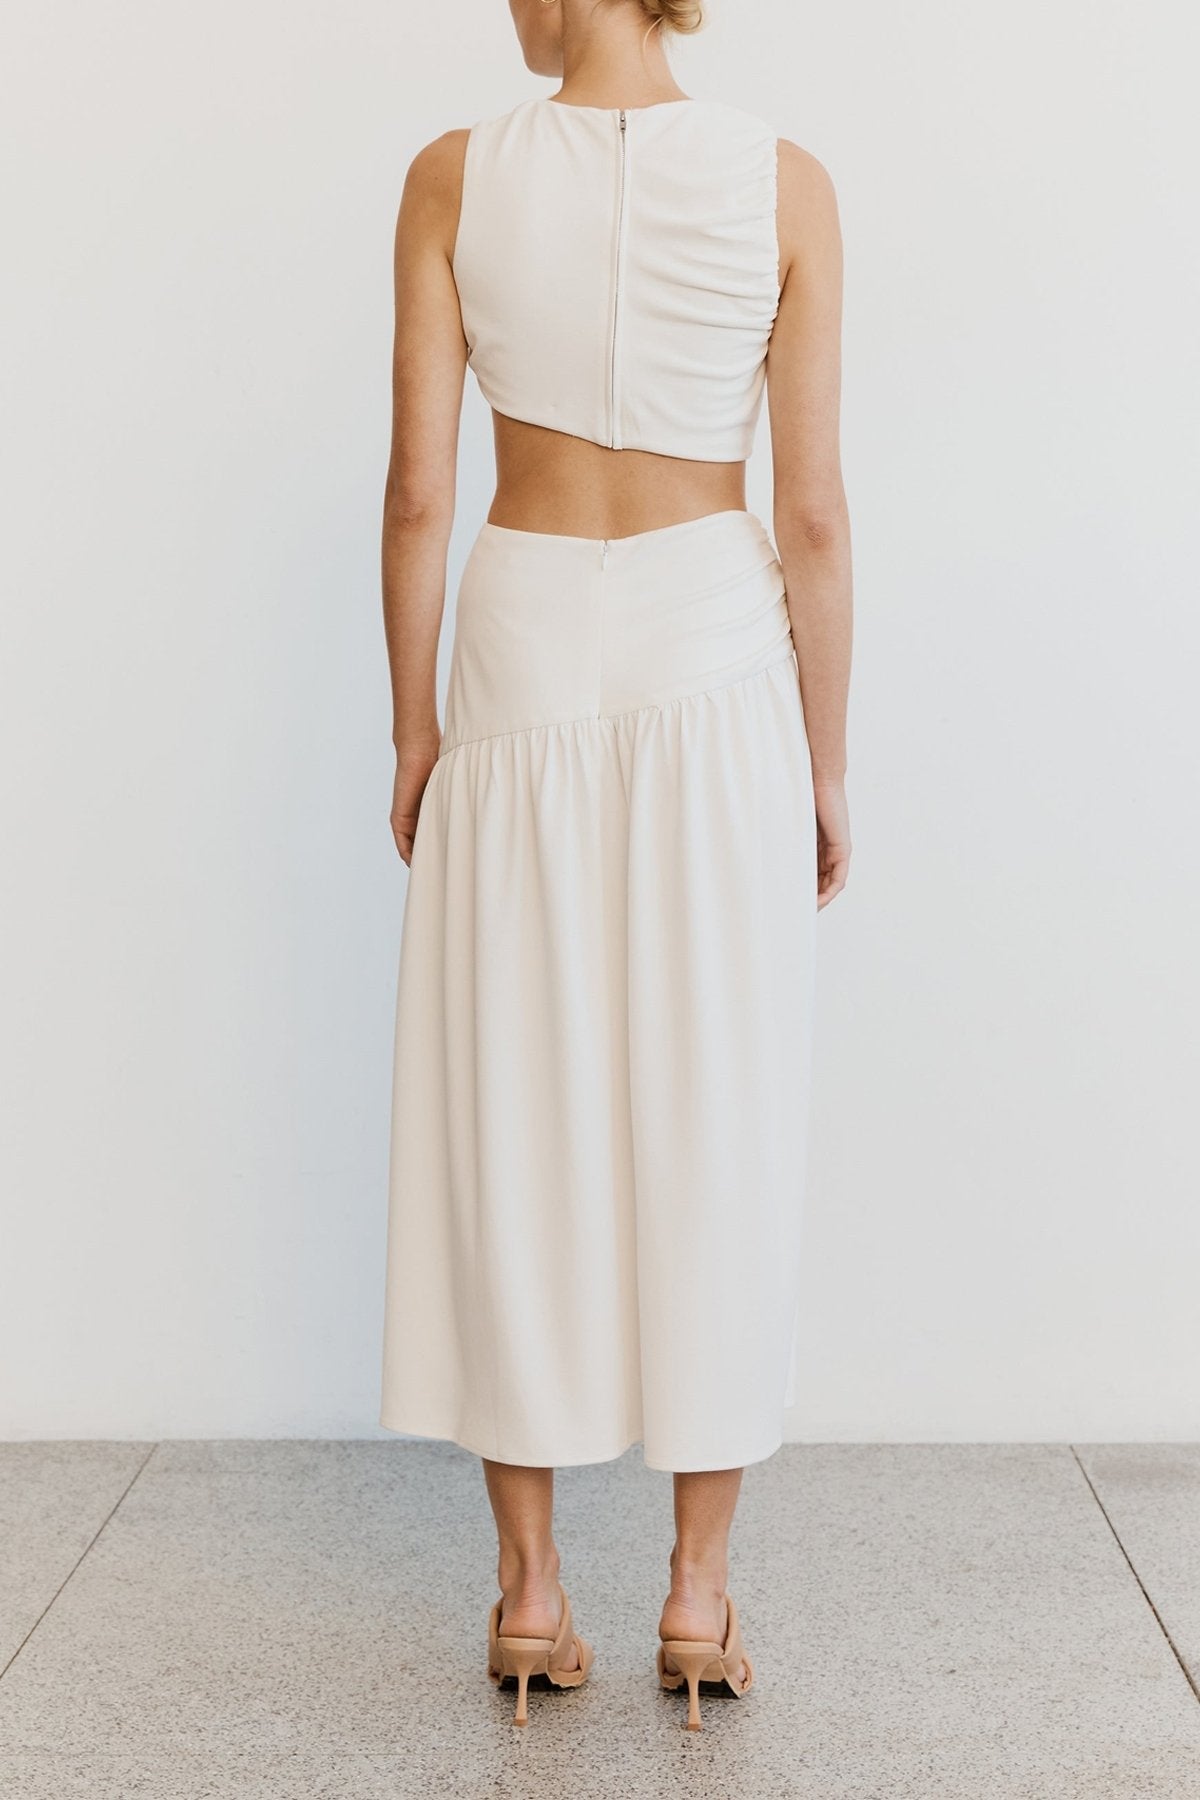 Marble Gathered Side Tank Top in Off White - shop-olivia.com